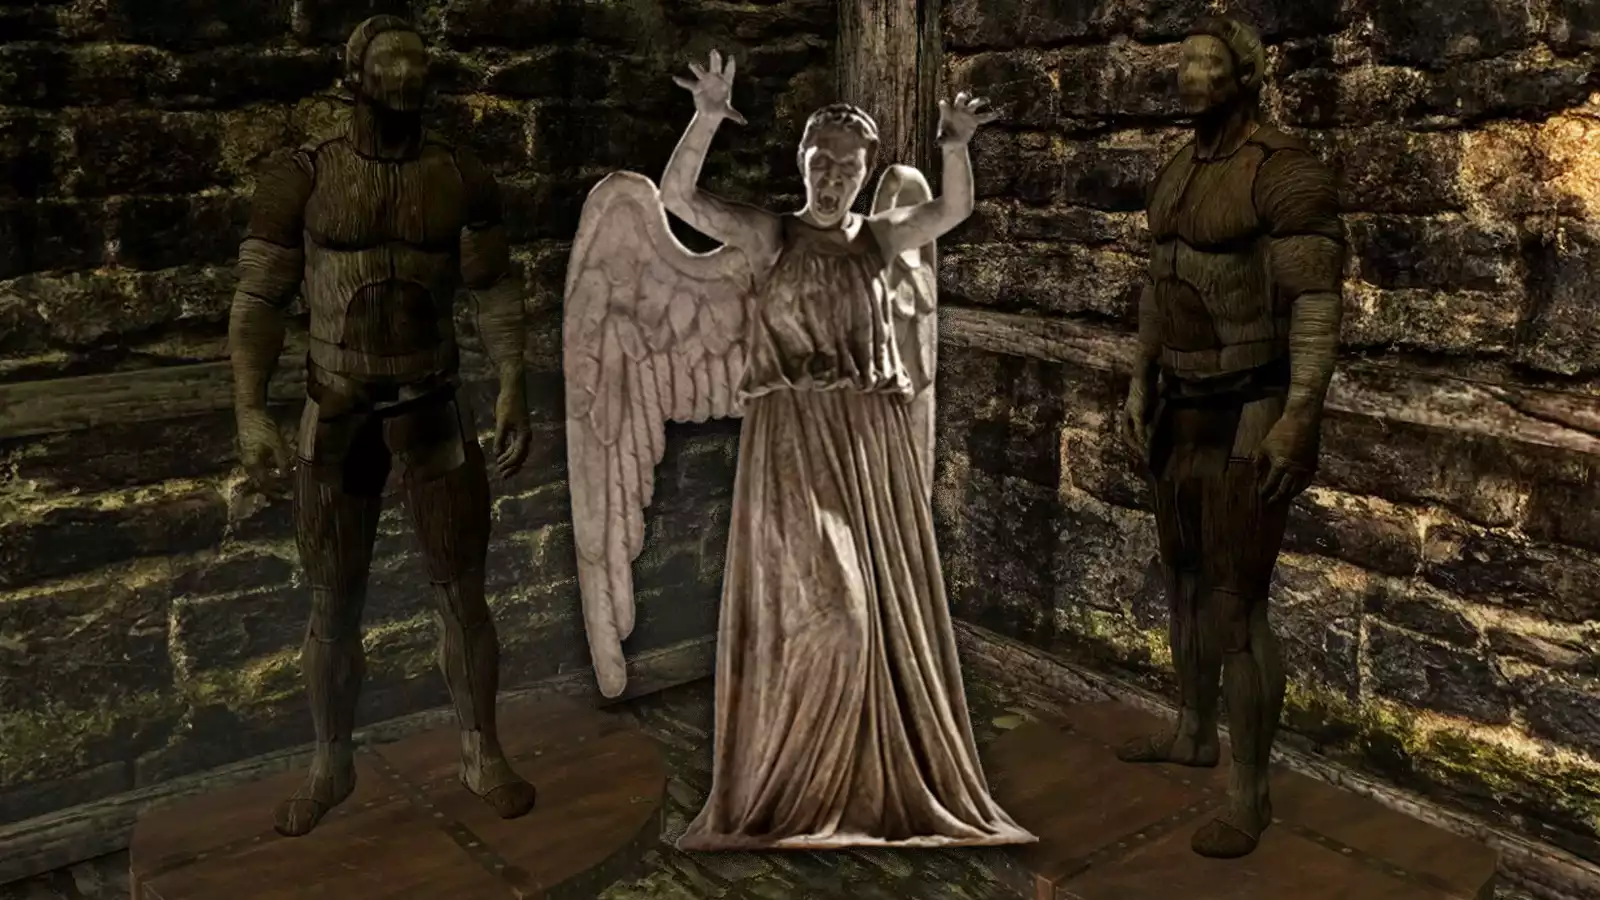 Skyrim Player 'Freaked Out' By Haunted Mannequins Shares Spooky Images